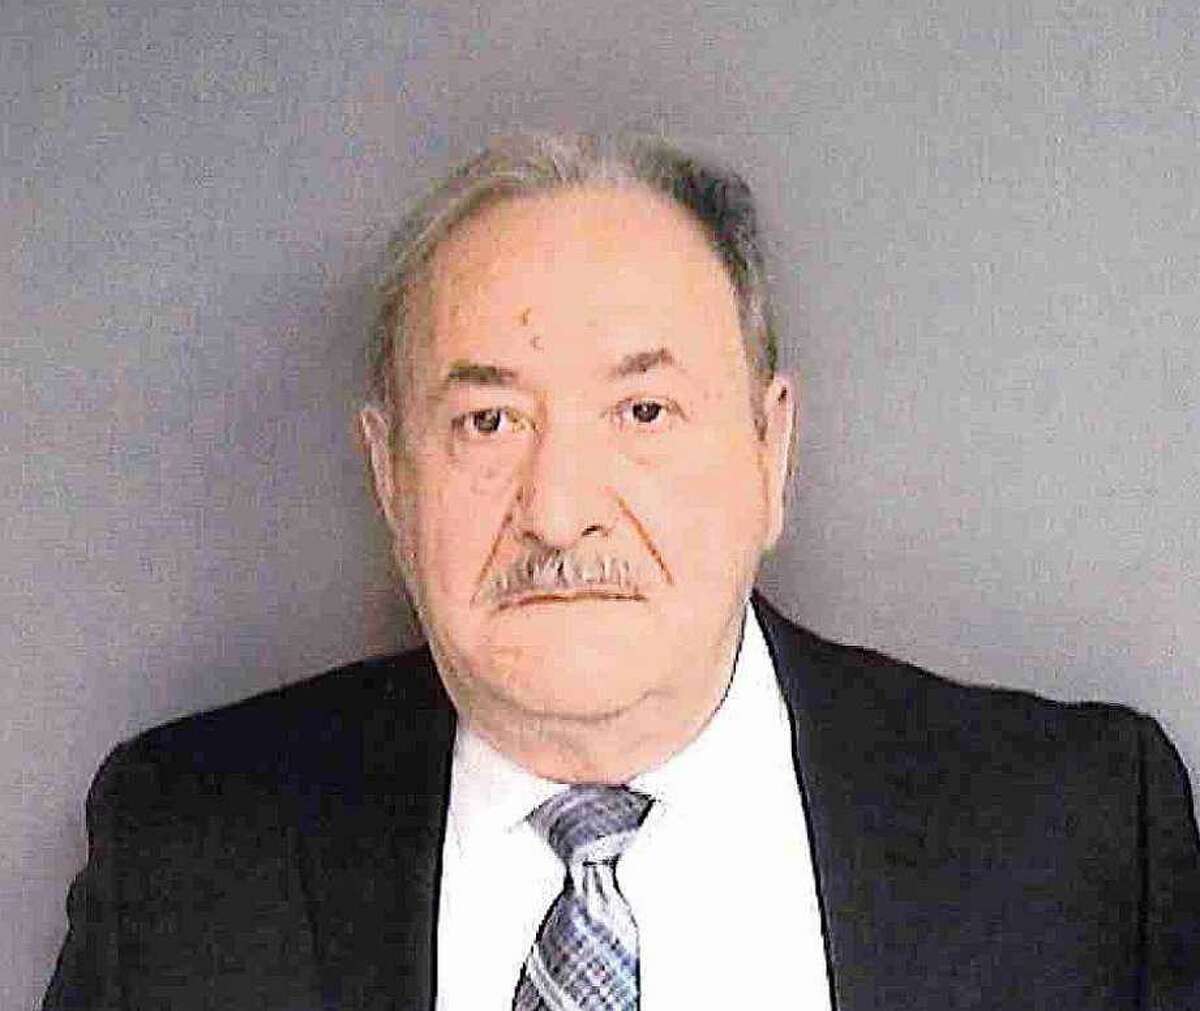 Former Democratic Party Chief John Mallozzi was charged with 14 counts each of filing false statements and second-degree forgery.